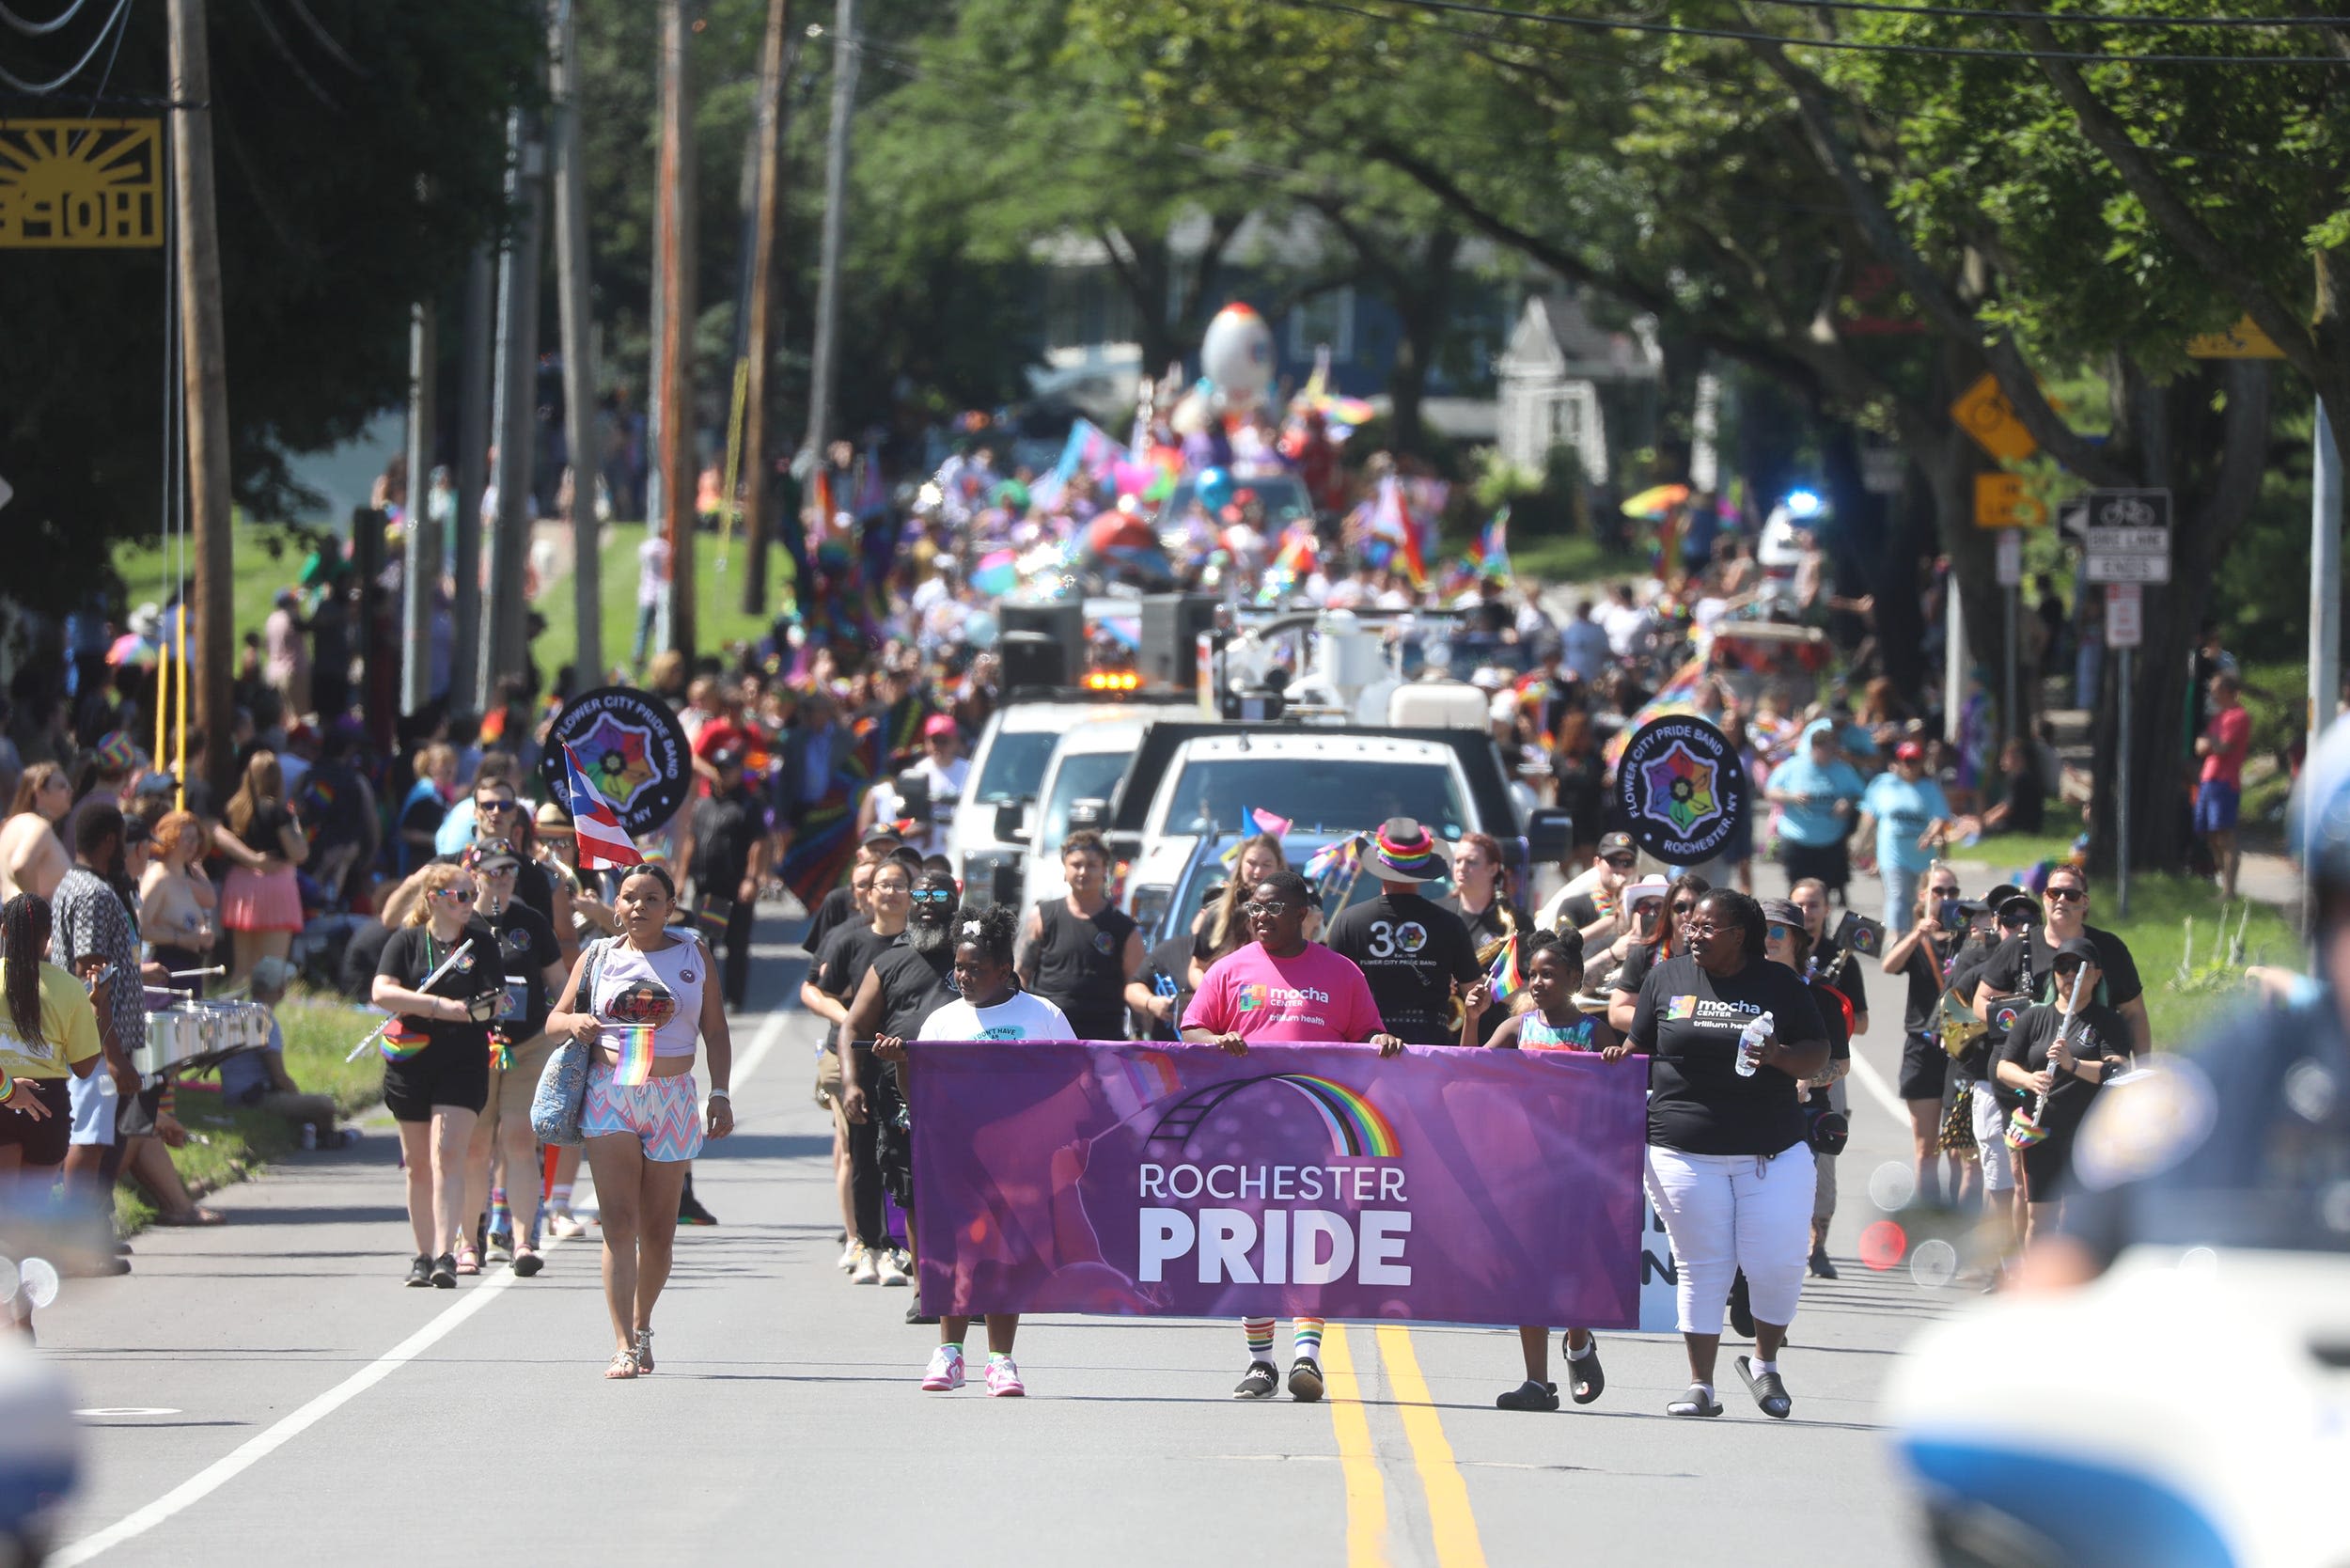 Rochester Pride Parade sees huge turnout on a perfect day: 'This is the best year yet'